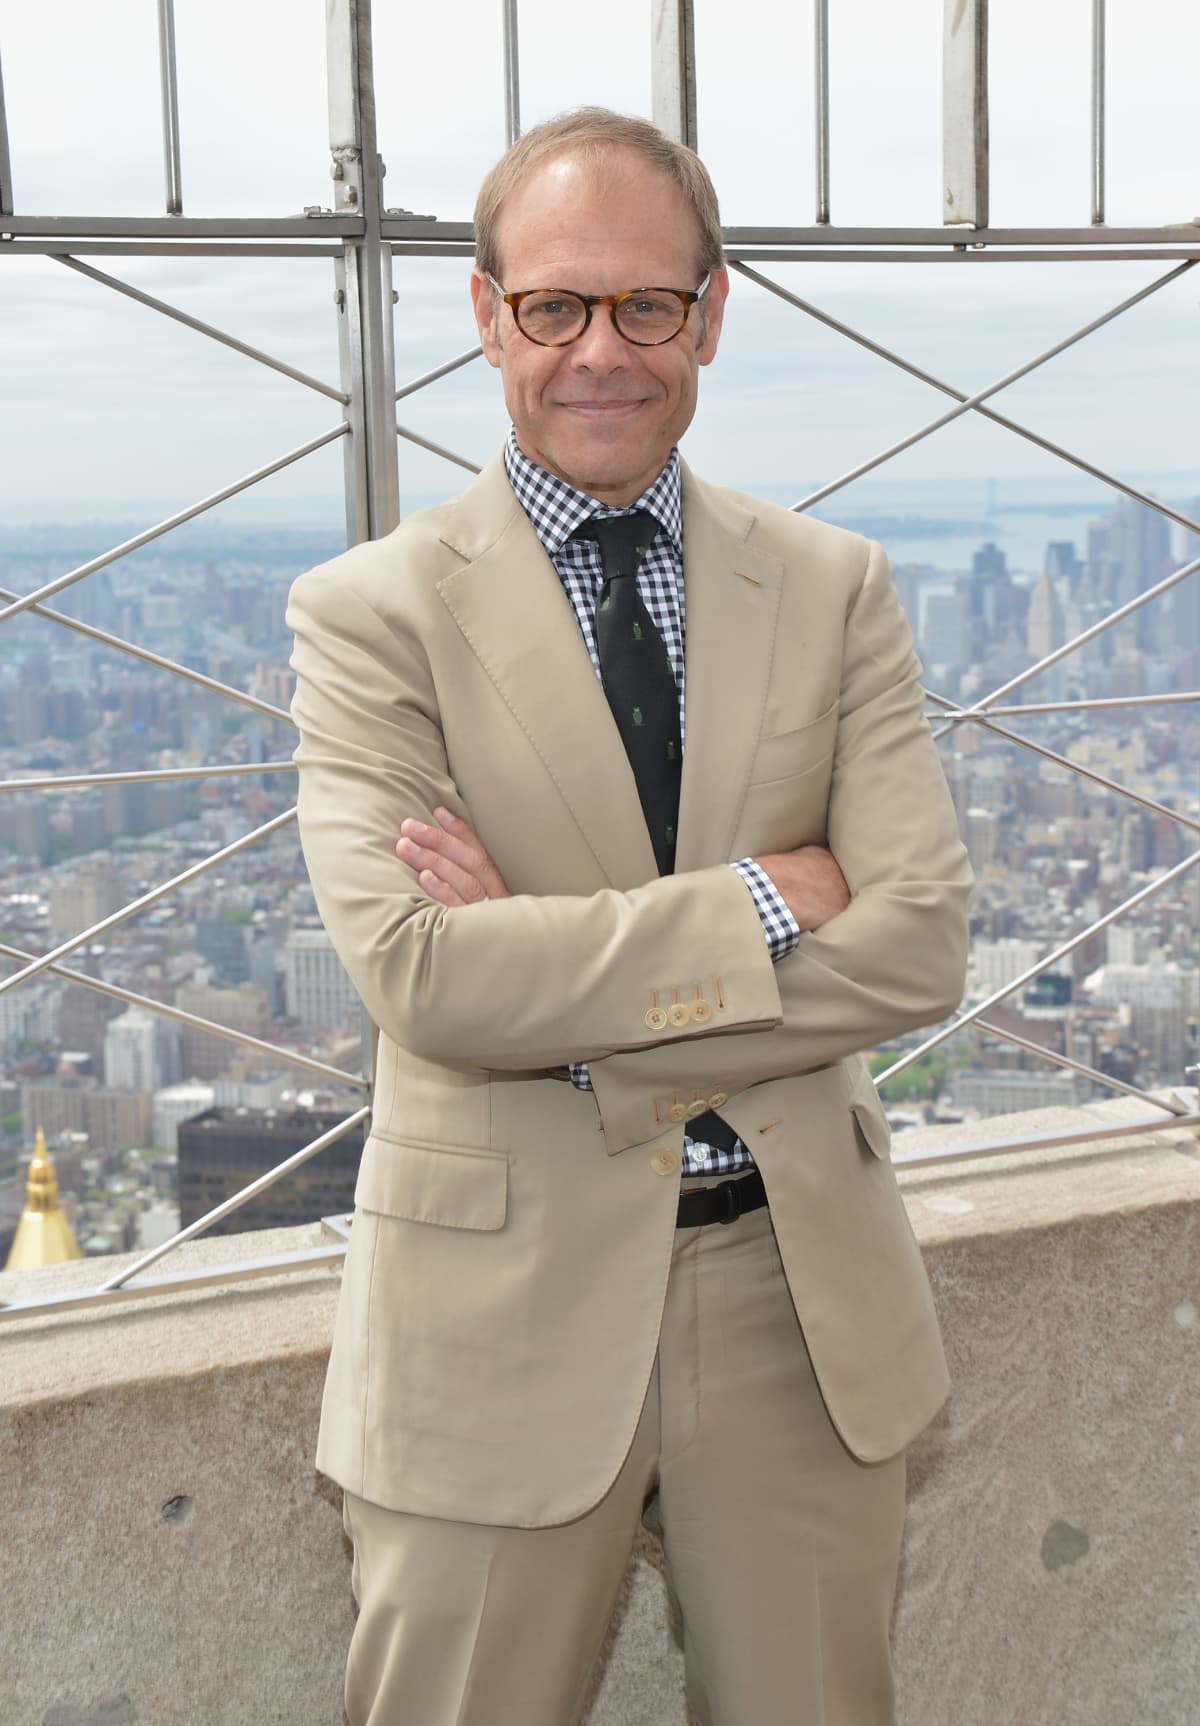 Alton brown crossing his arms and smiling